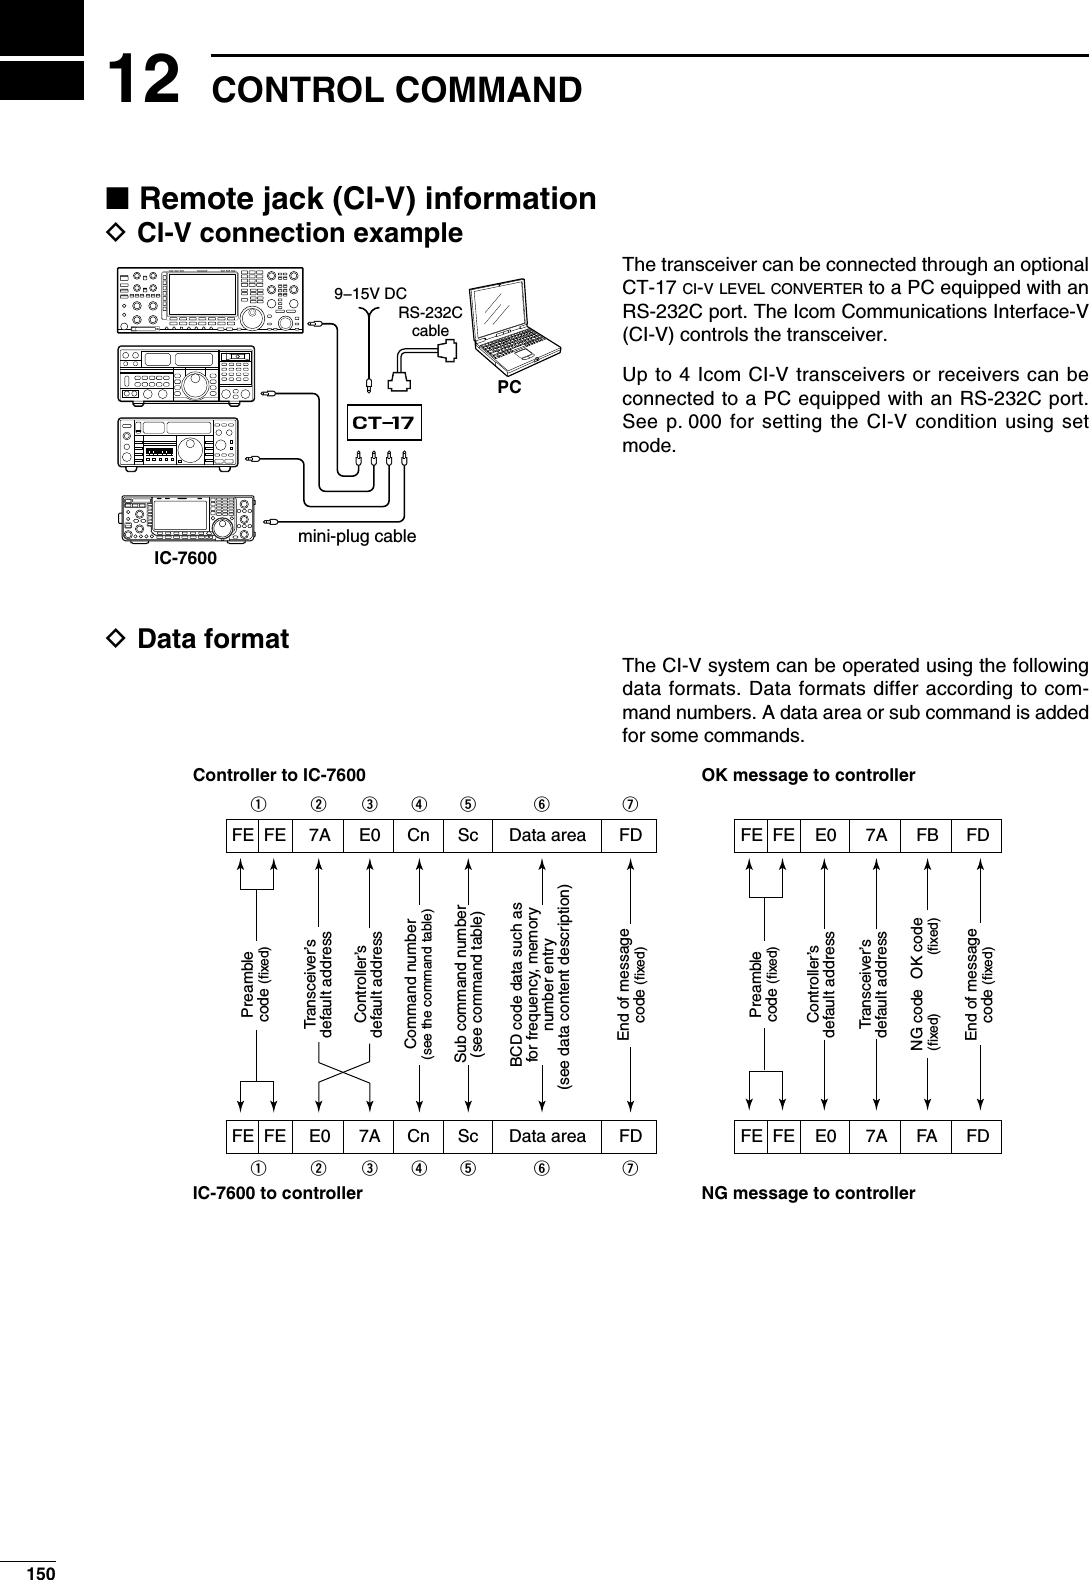 N Remote jack (CI-V) informationD CI-V connection example The transceiver can be connected through an optional CT-17 CI-V LEVEL CONVERTER to a PC equipped with an RS-232C port. The Icom Communications Interface-V (CI-V) controls the transceiver.Up to 4 Icom CI-V transceivers or receivers can be connected to a PC equipped with an RS-232C port. See p. 000 for setting the CI-V condition using set mode.D Data formatThe CI-V system can be operated using the following data formats. Data formats differ according to com-mand numbers. A data area or sub command is added for some commands.9−15V DCPCct-17mini-plug cableIC-7600RS-232CcableController to IC-7600FE FE 7A E0 Cn Sc Data area FDPreamblecode (fixed)Transceiver’sdefault addressController’sdefault addressCommand number(see the command table)Sub command number(see command table)BCD code data such asfor frequency, memorynumber entry(see data content description) End of messagecode (fixed)OK message to controllerFE FE E0 7A FB FDFE FE E0 7A FA FDPreamblecode (fixed)Controller’sdefault addressTransceiver’sdefault addressOK code(fixed)End of messagecode (fixed)NG message to controllerNG code(fixed)IC-7600 to controllerqwert y uFE FE E0 7A Cn Sc Data area FDqwert y u12150CONTROL COMMAND